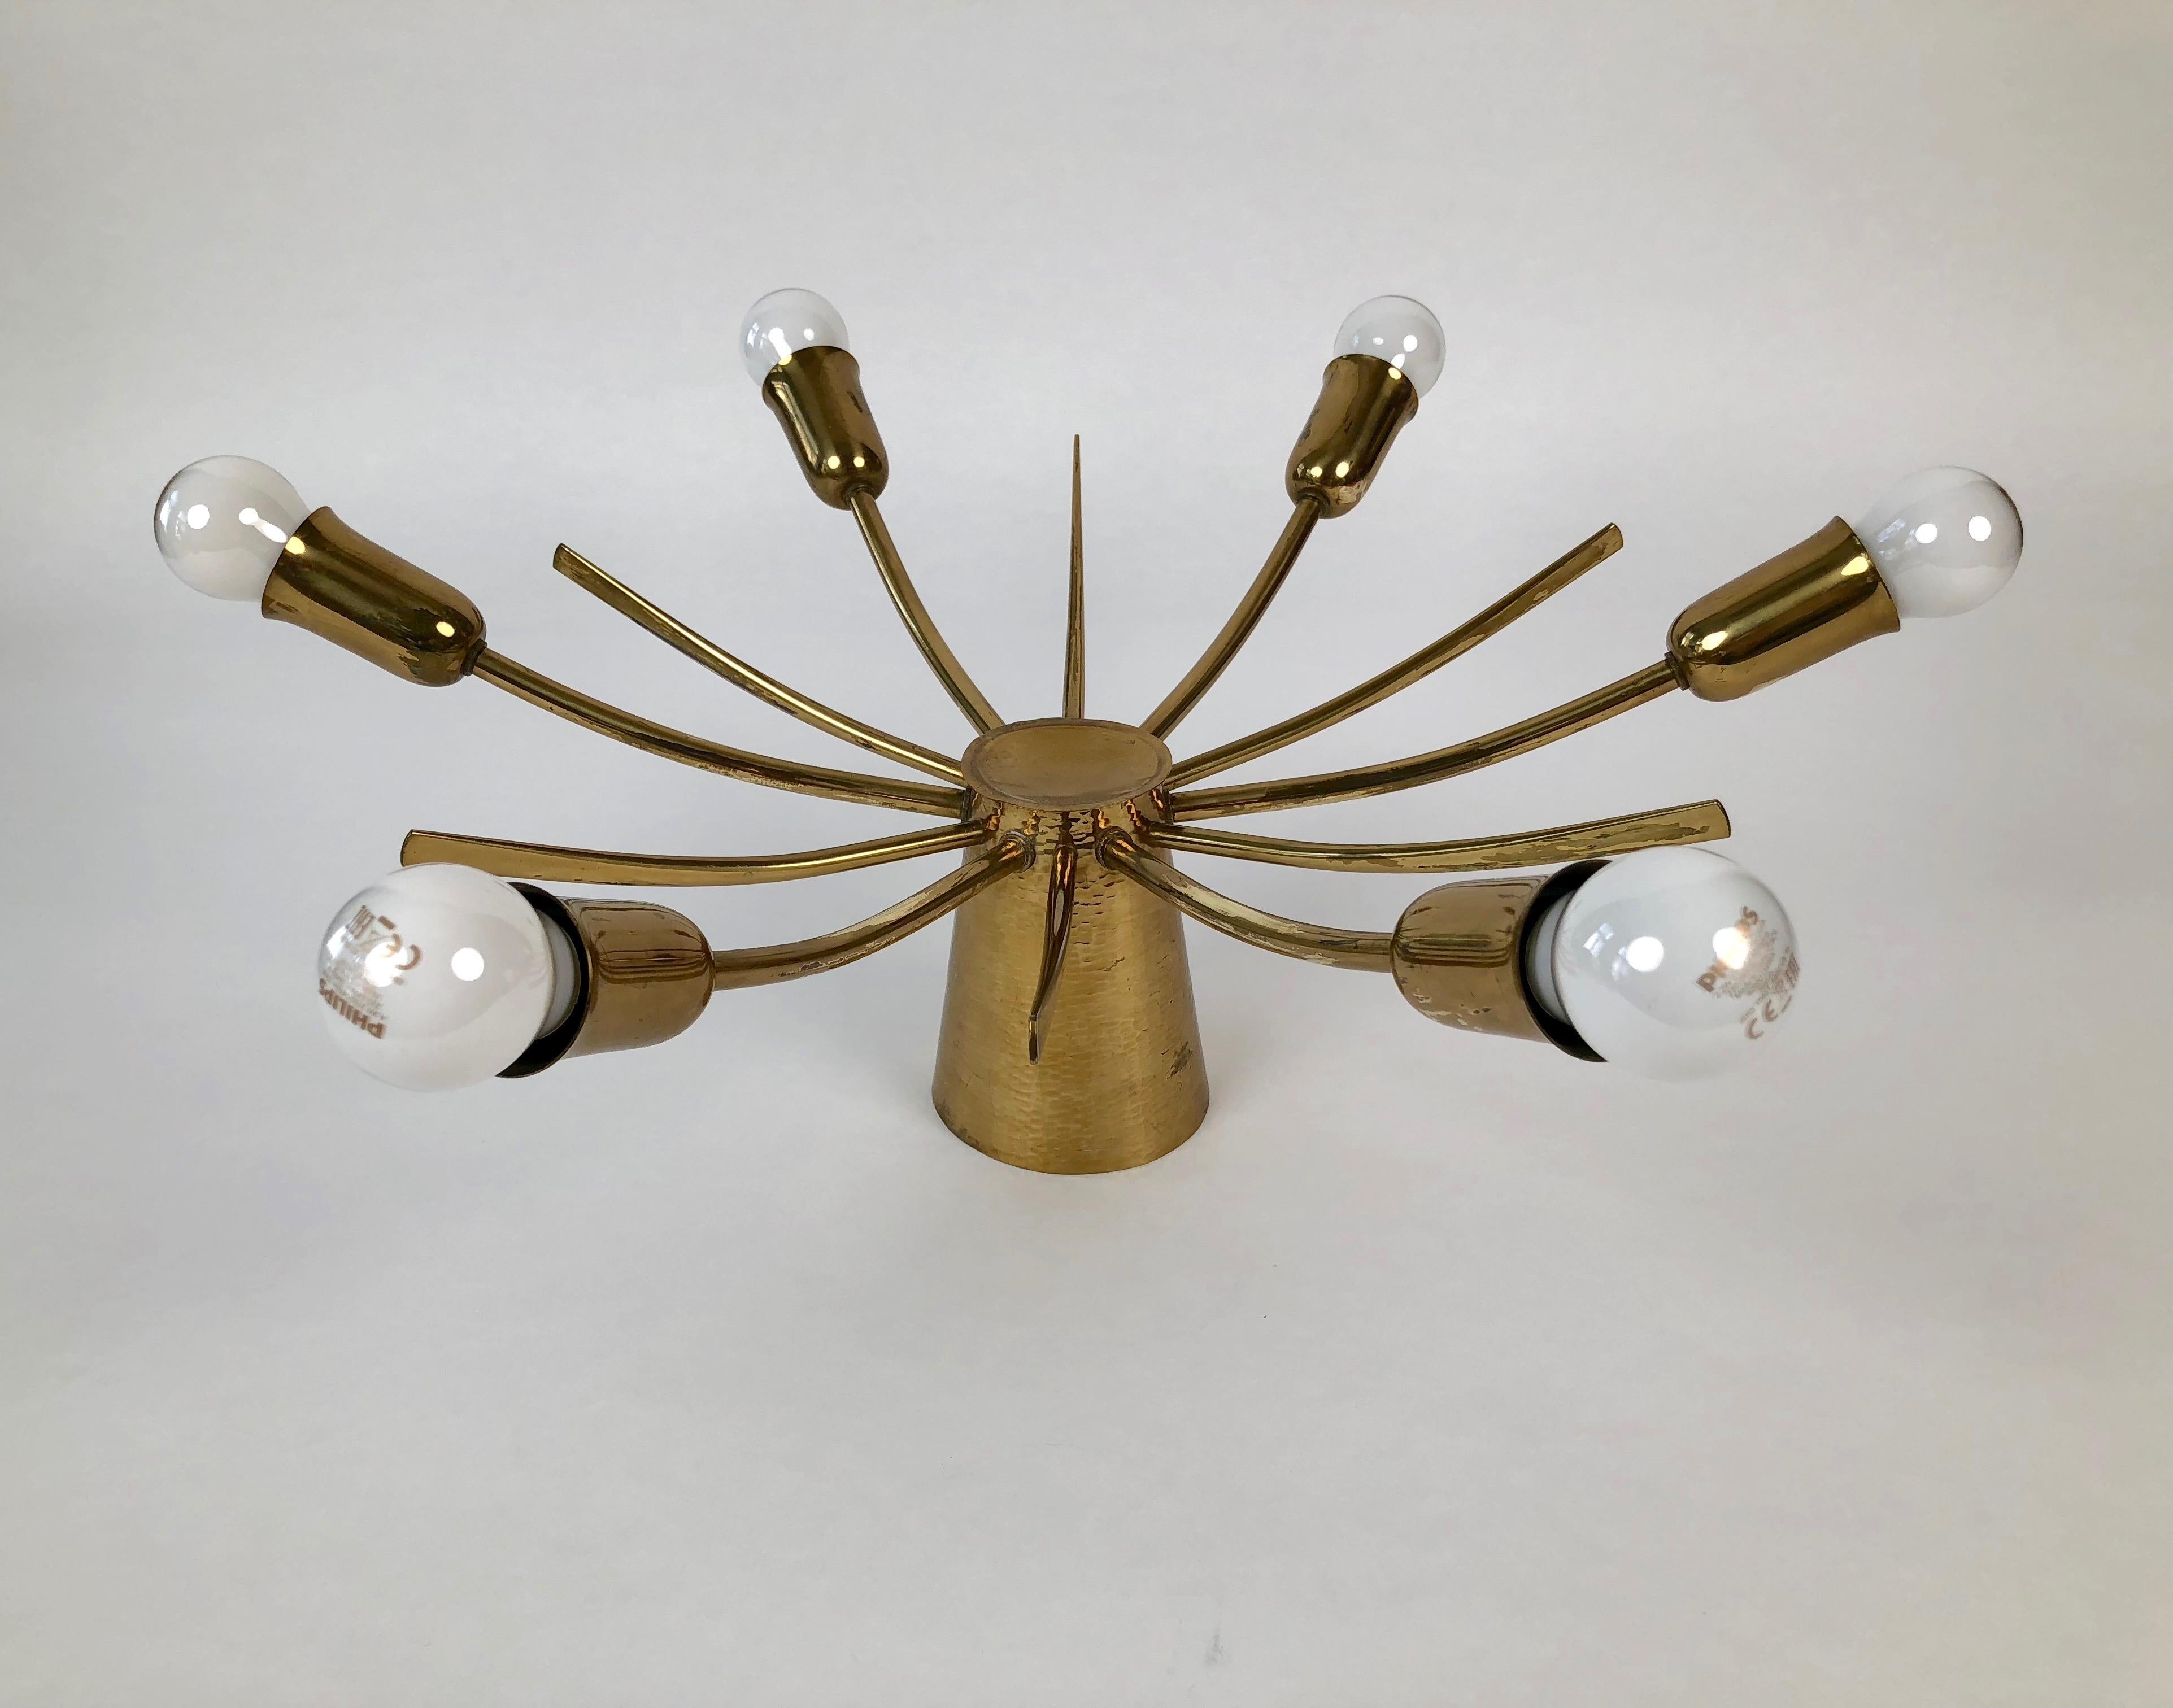 This sun ceiling lamp made in solid brass with a hand hammered cone features 6-light bulbs (40 Watt).
Made in France, circa 1950.